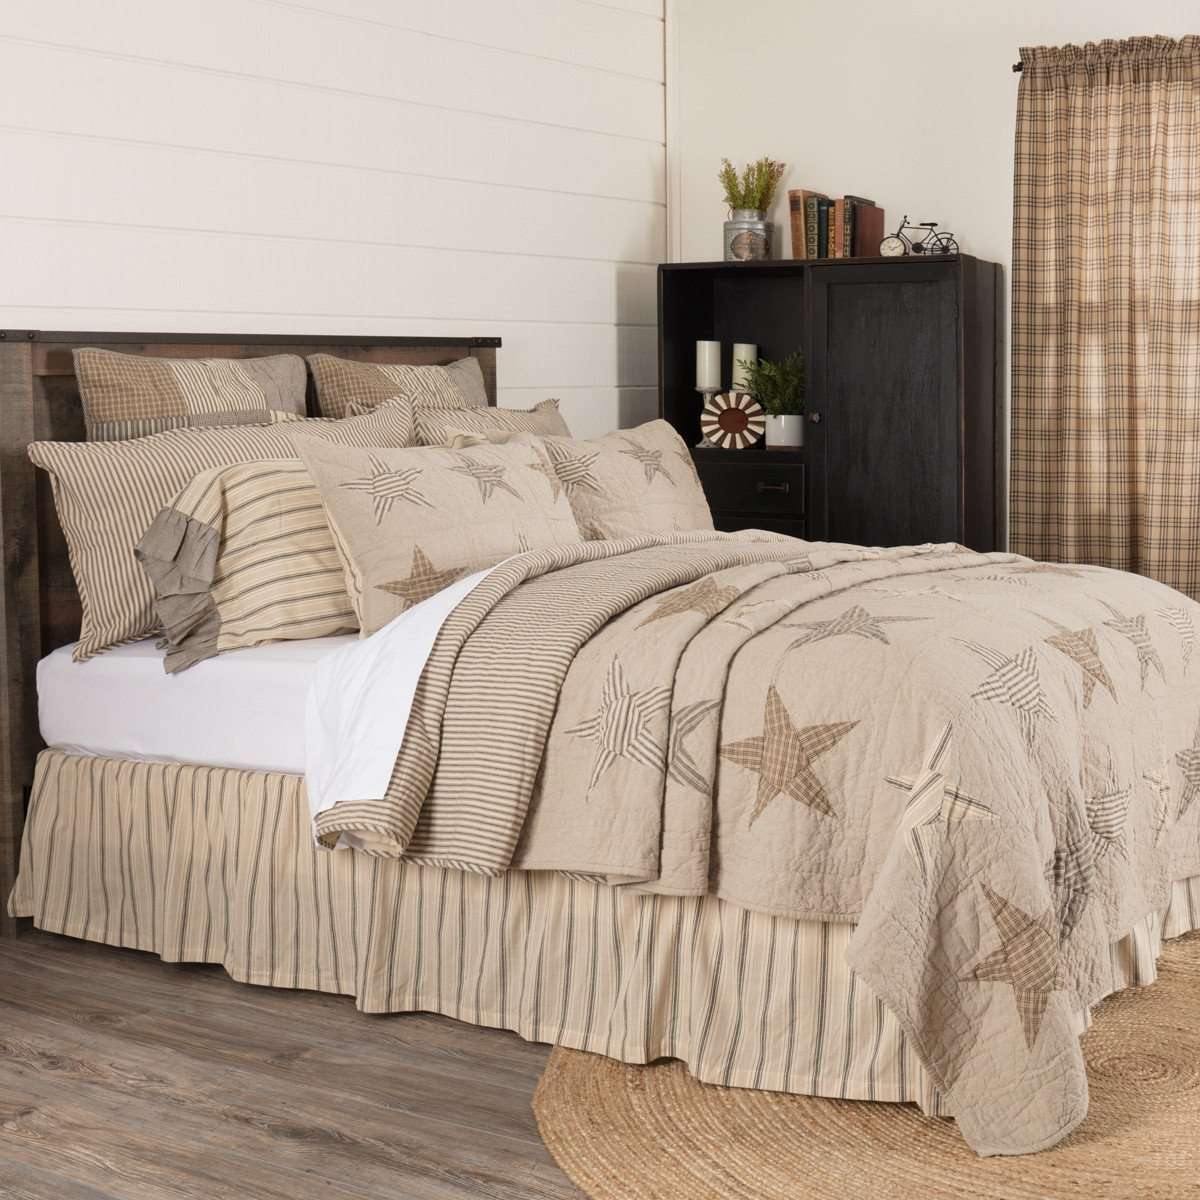 Sawyer Mill Star Charcoal Twin Quilt 68Wx86L VHC Brands online